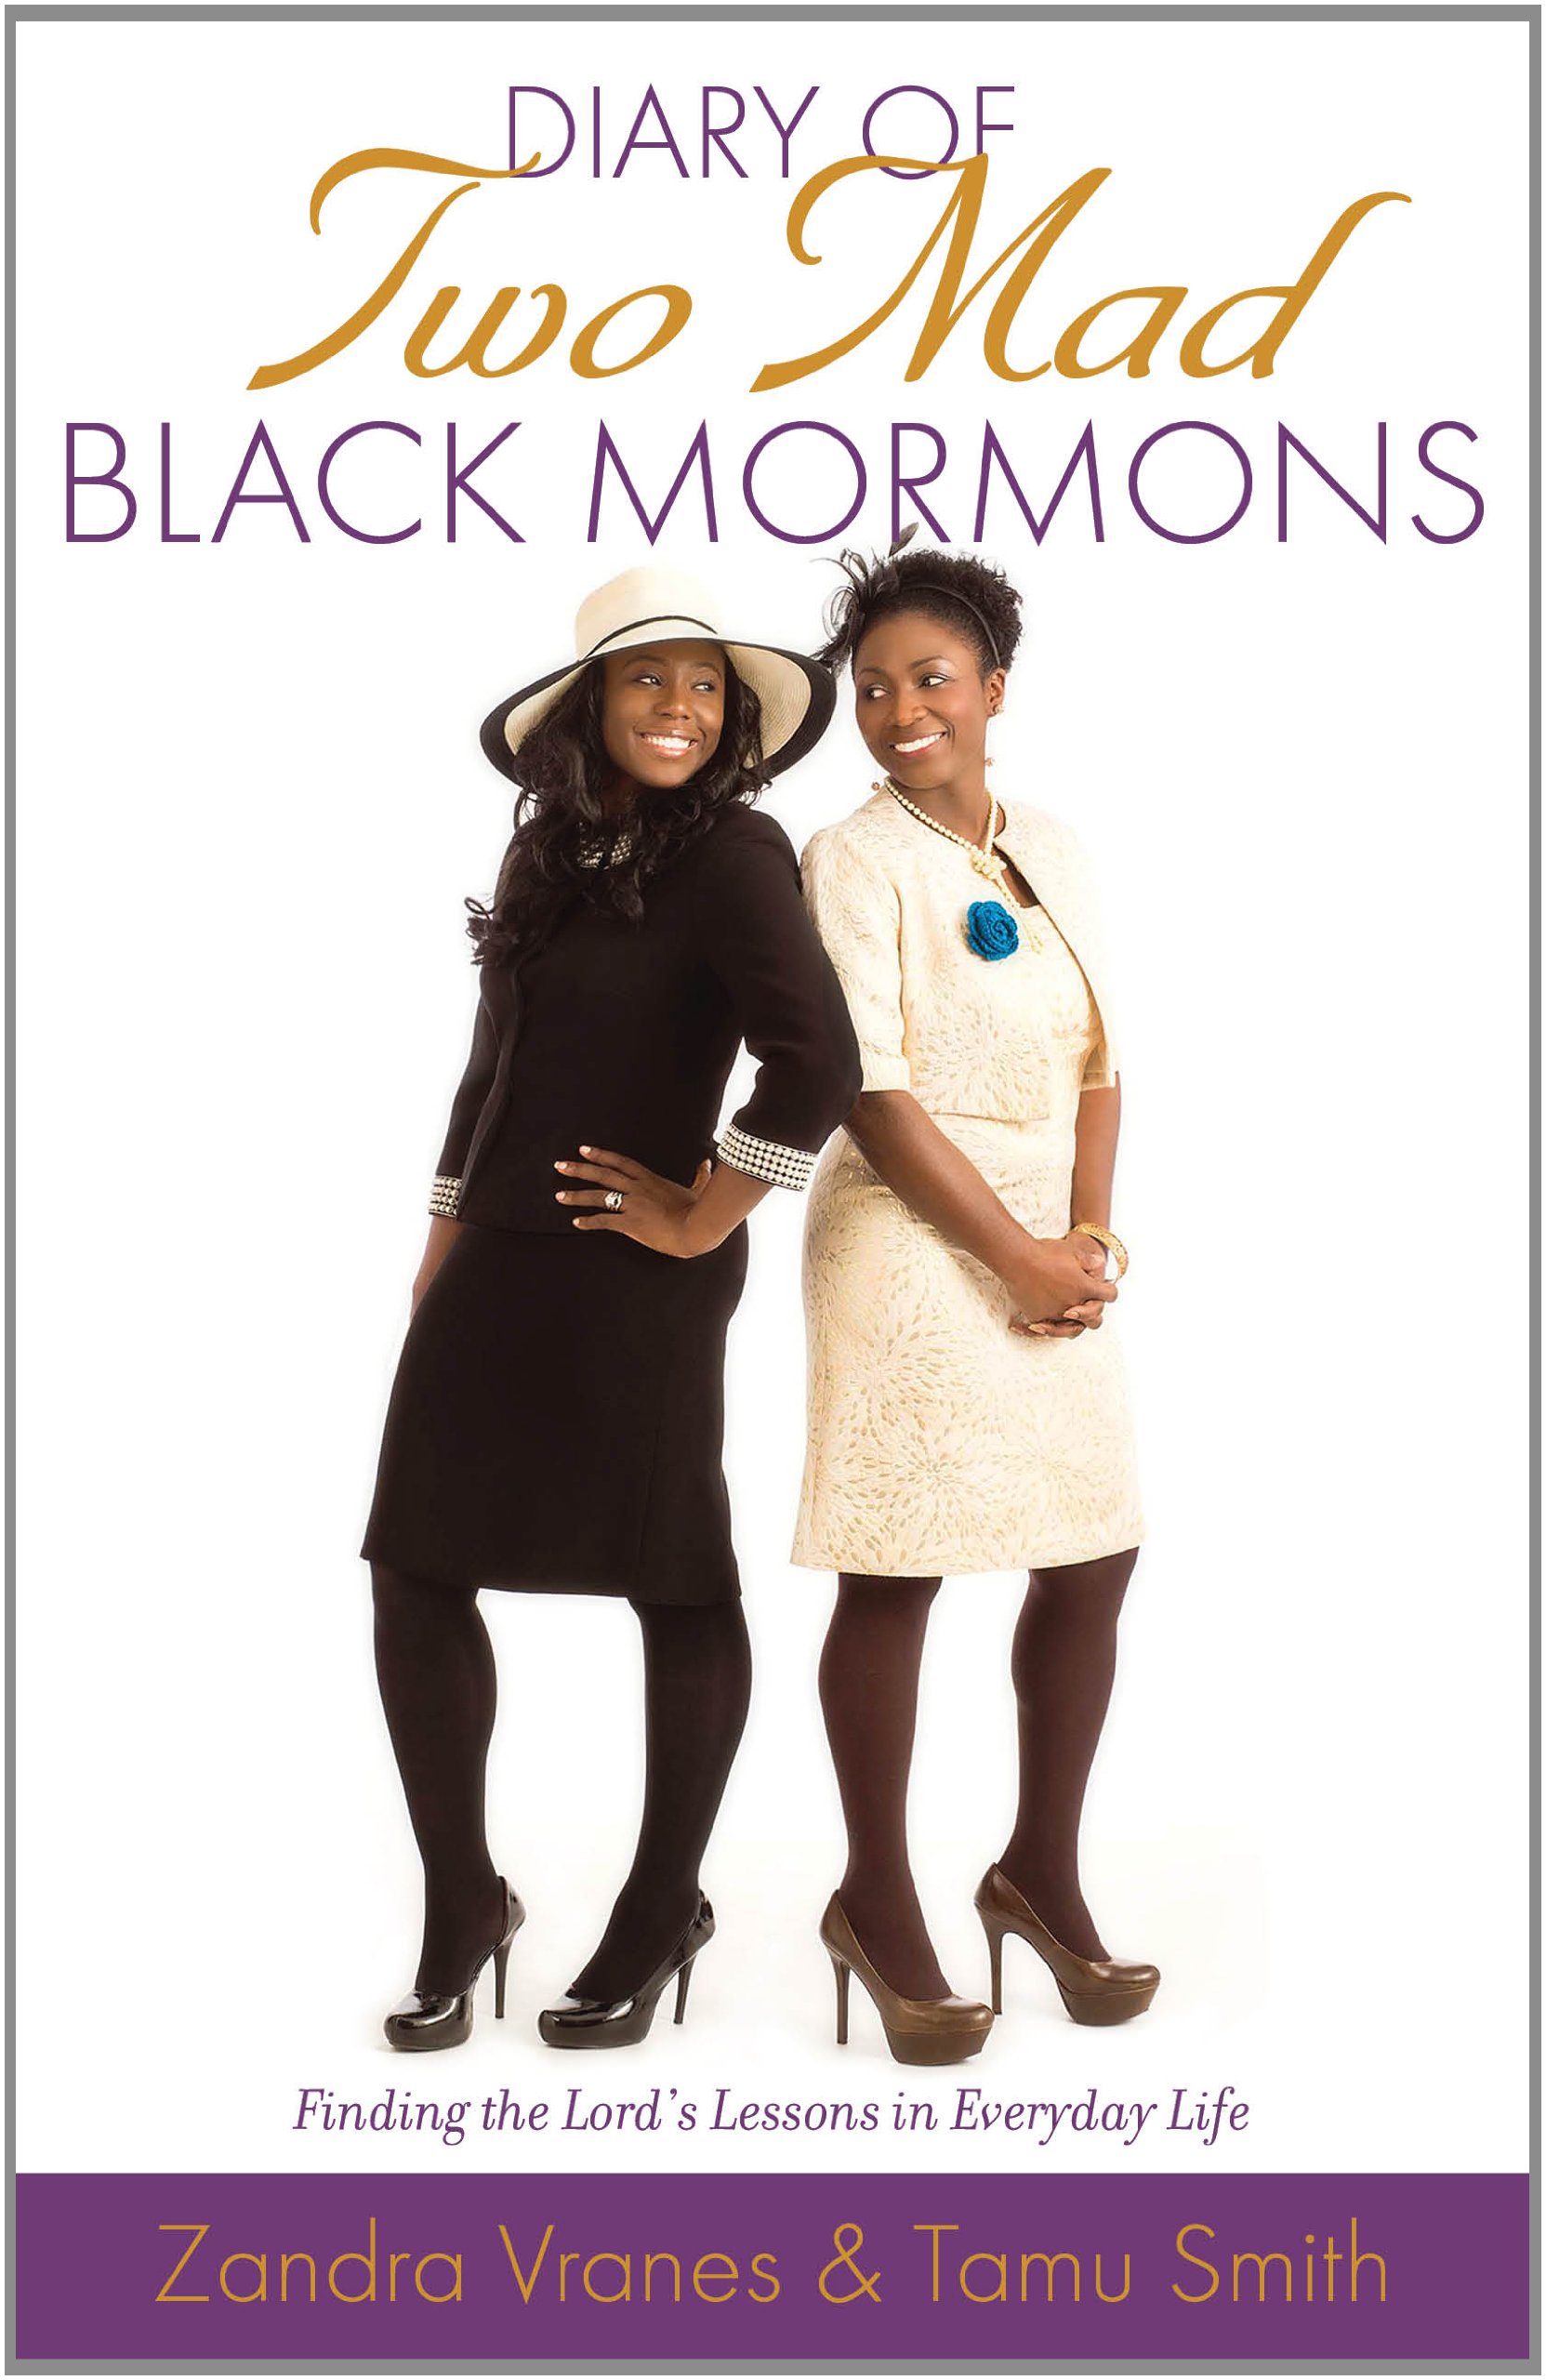 A Review of Diary Of Two Mad Black Mormons